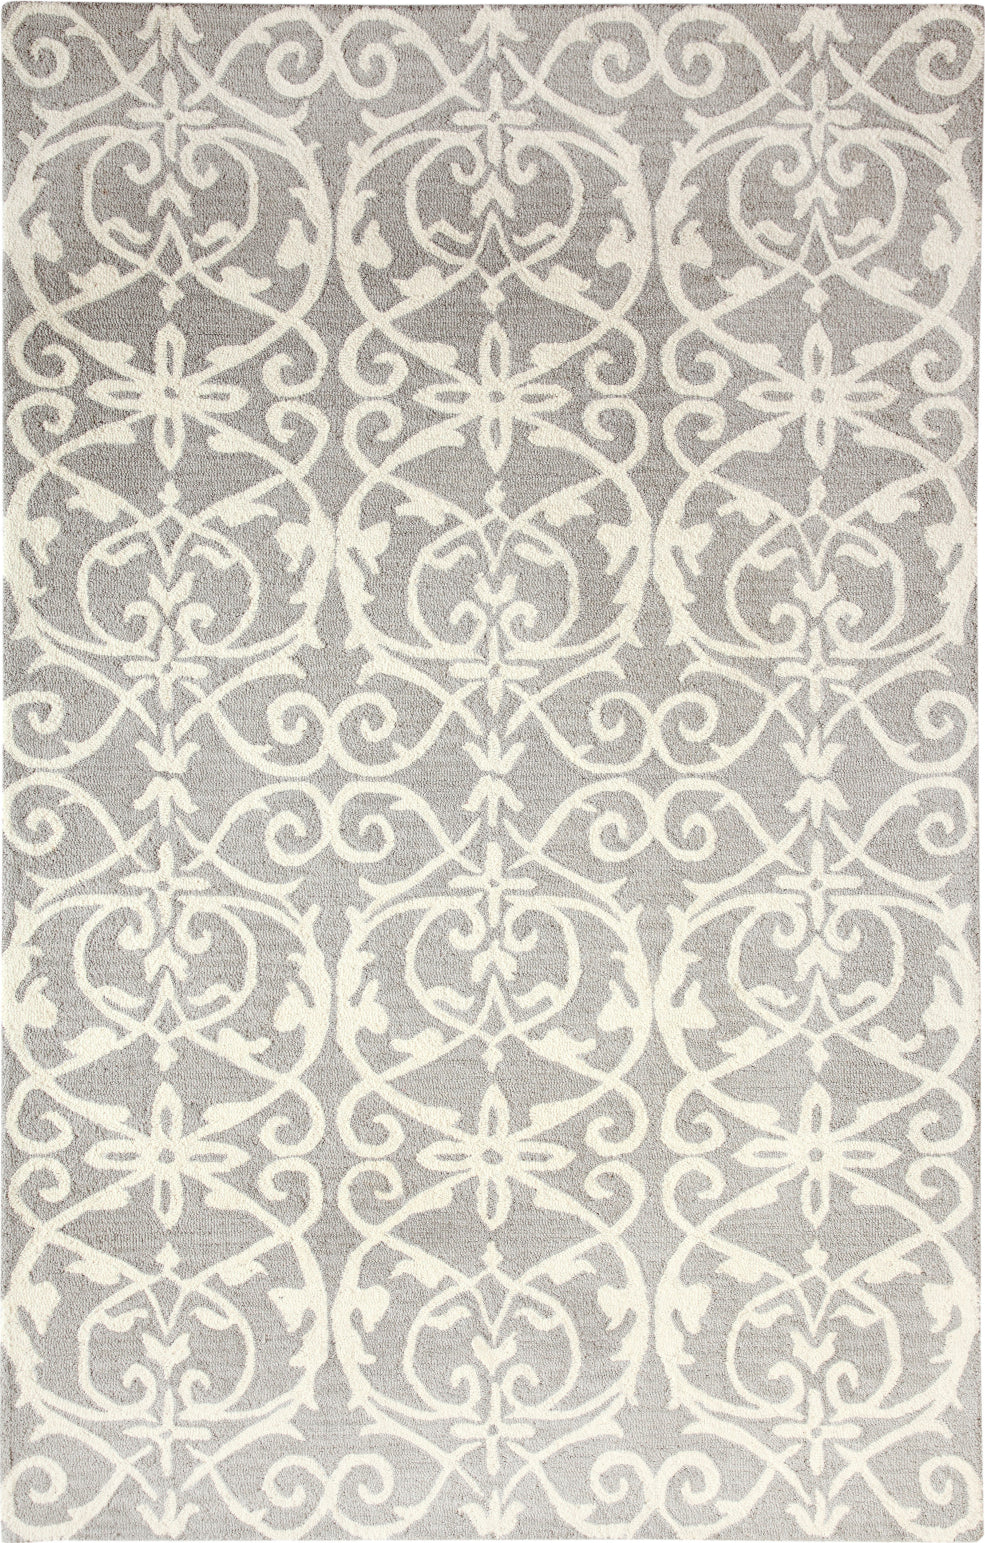 Dynamic Rugs Galleria 7864 Silver Area Rug main image